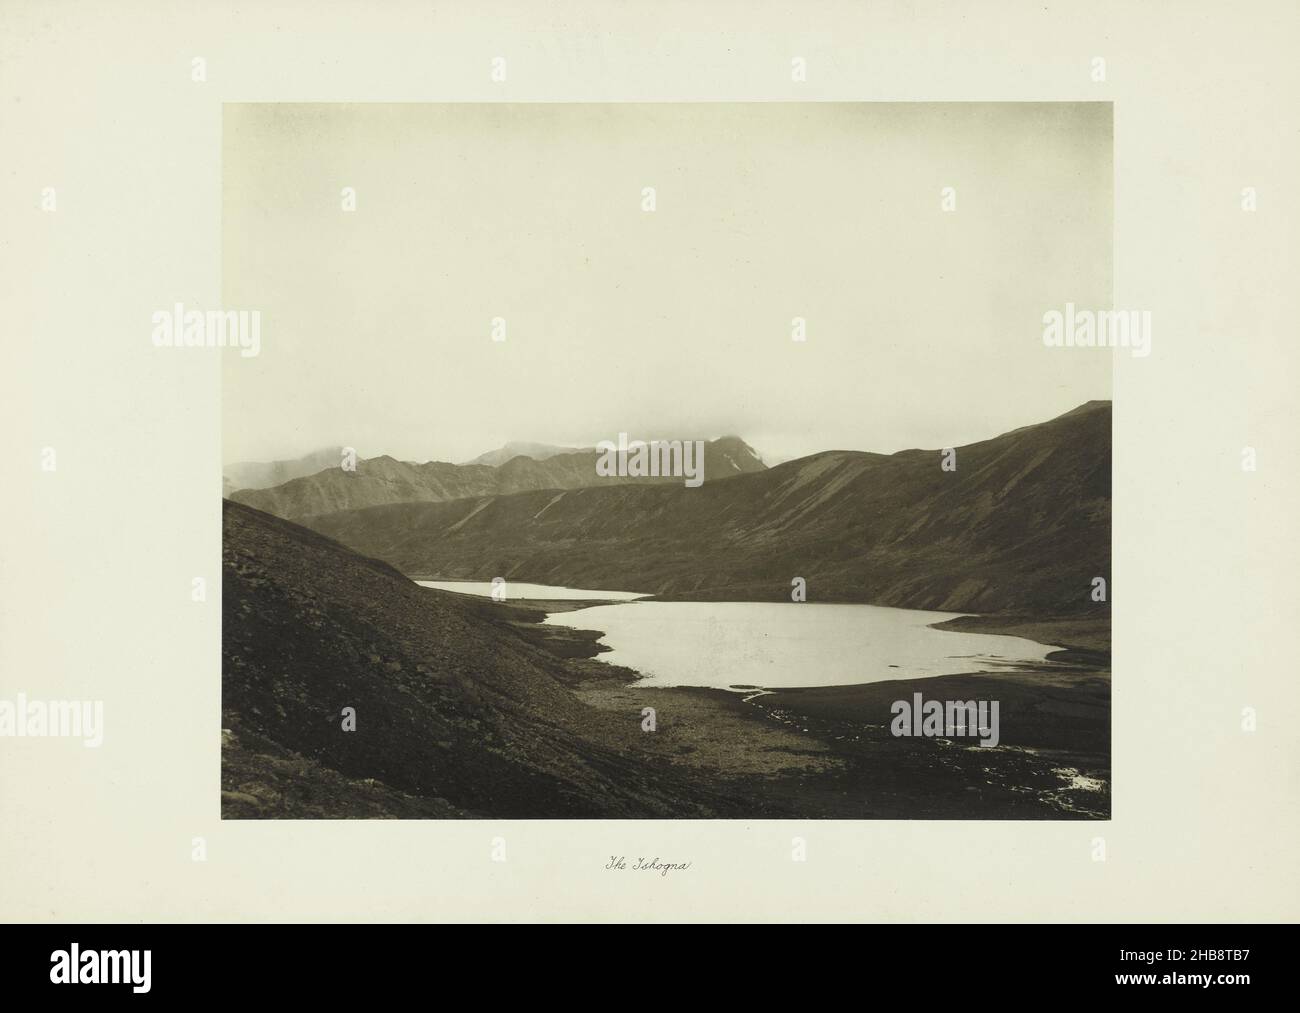 View of Lake Tsomgo in the Himalayas, India, The Tshogna (title on object), John Claude White (mentioned on object), Sikkim, 1903 - 1904, paper, cardboard, albumen print, height 230 mm × width 286 mmheight 315 mm × width 438 mm Stock Photo